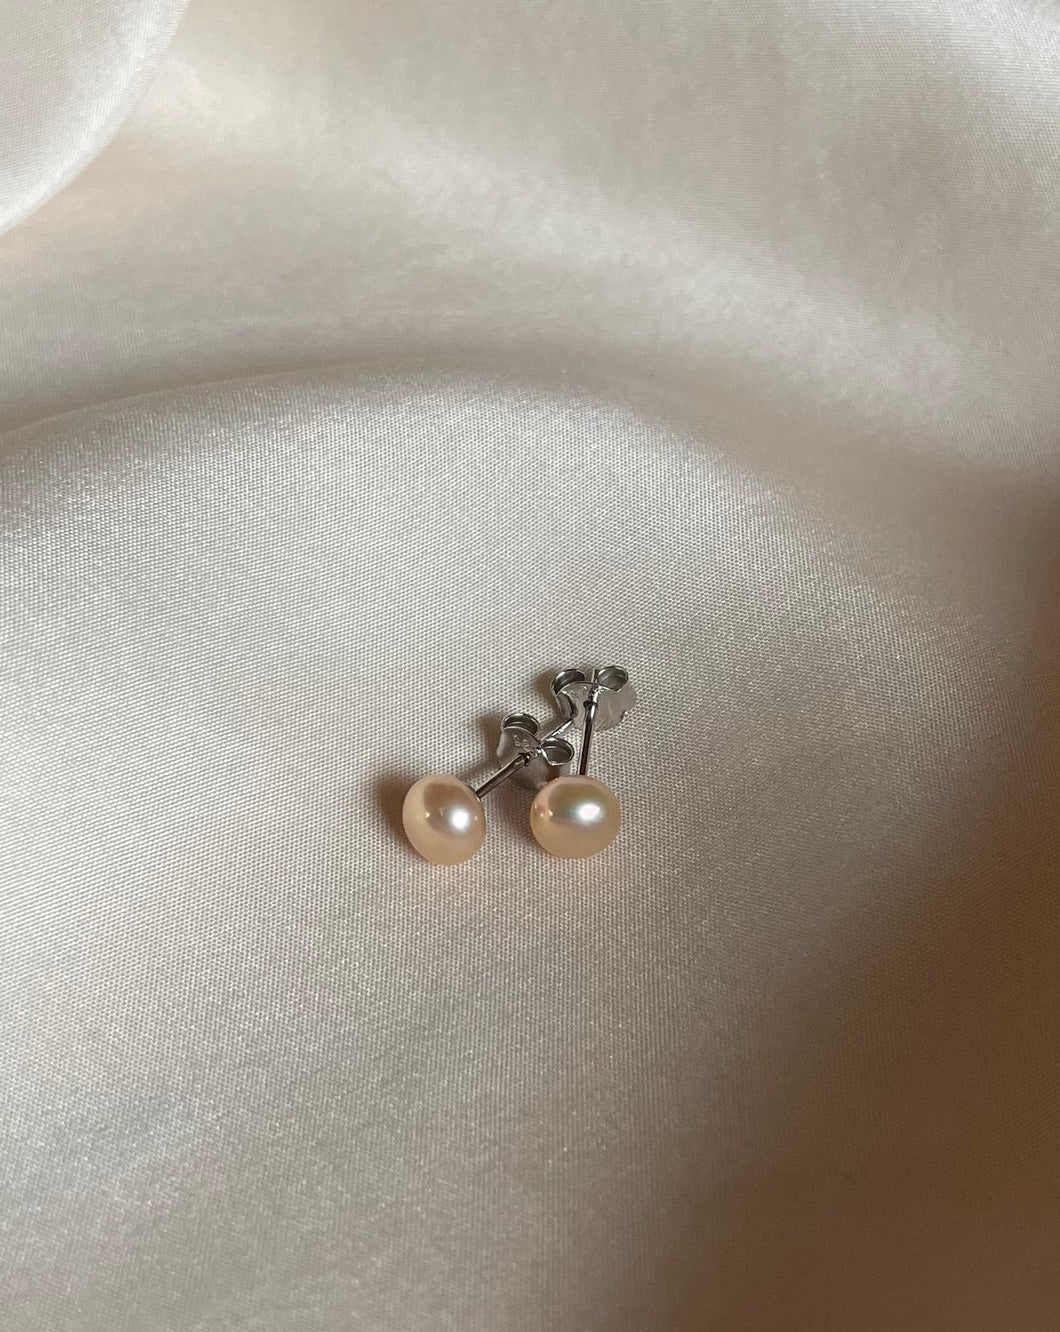 Lustrous freshwater pearl earrings in natural apricot